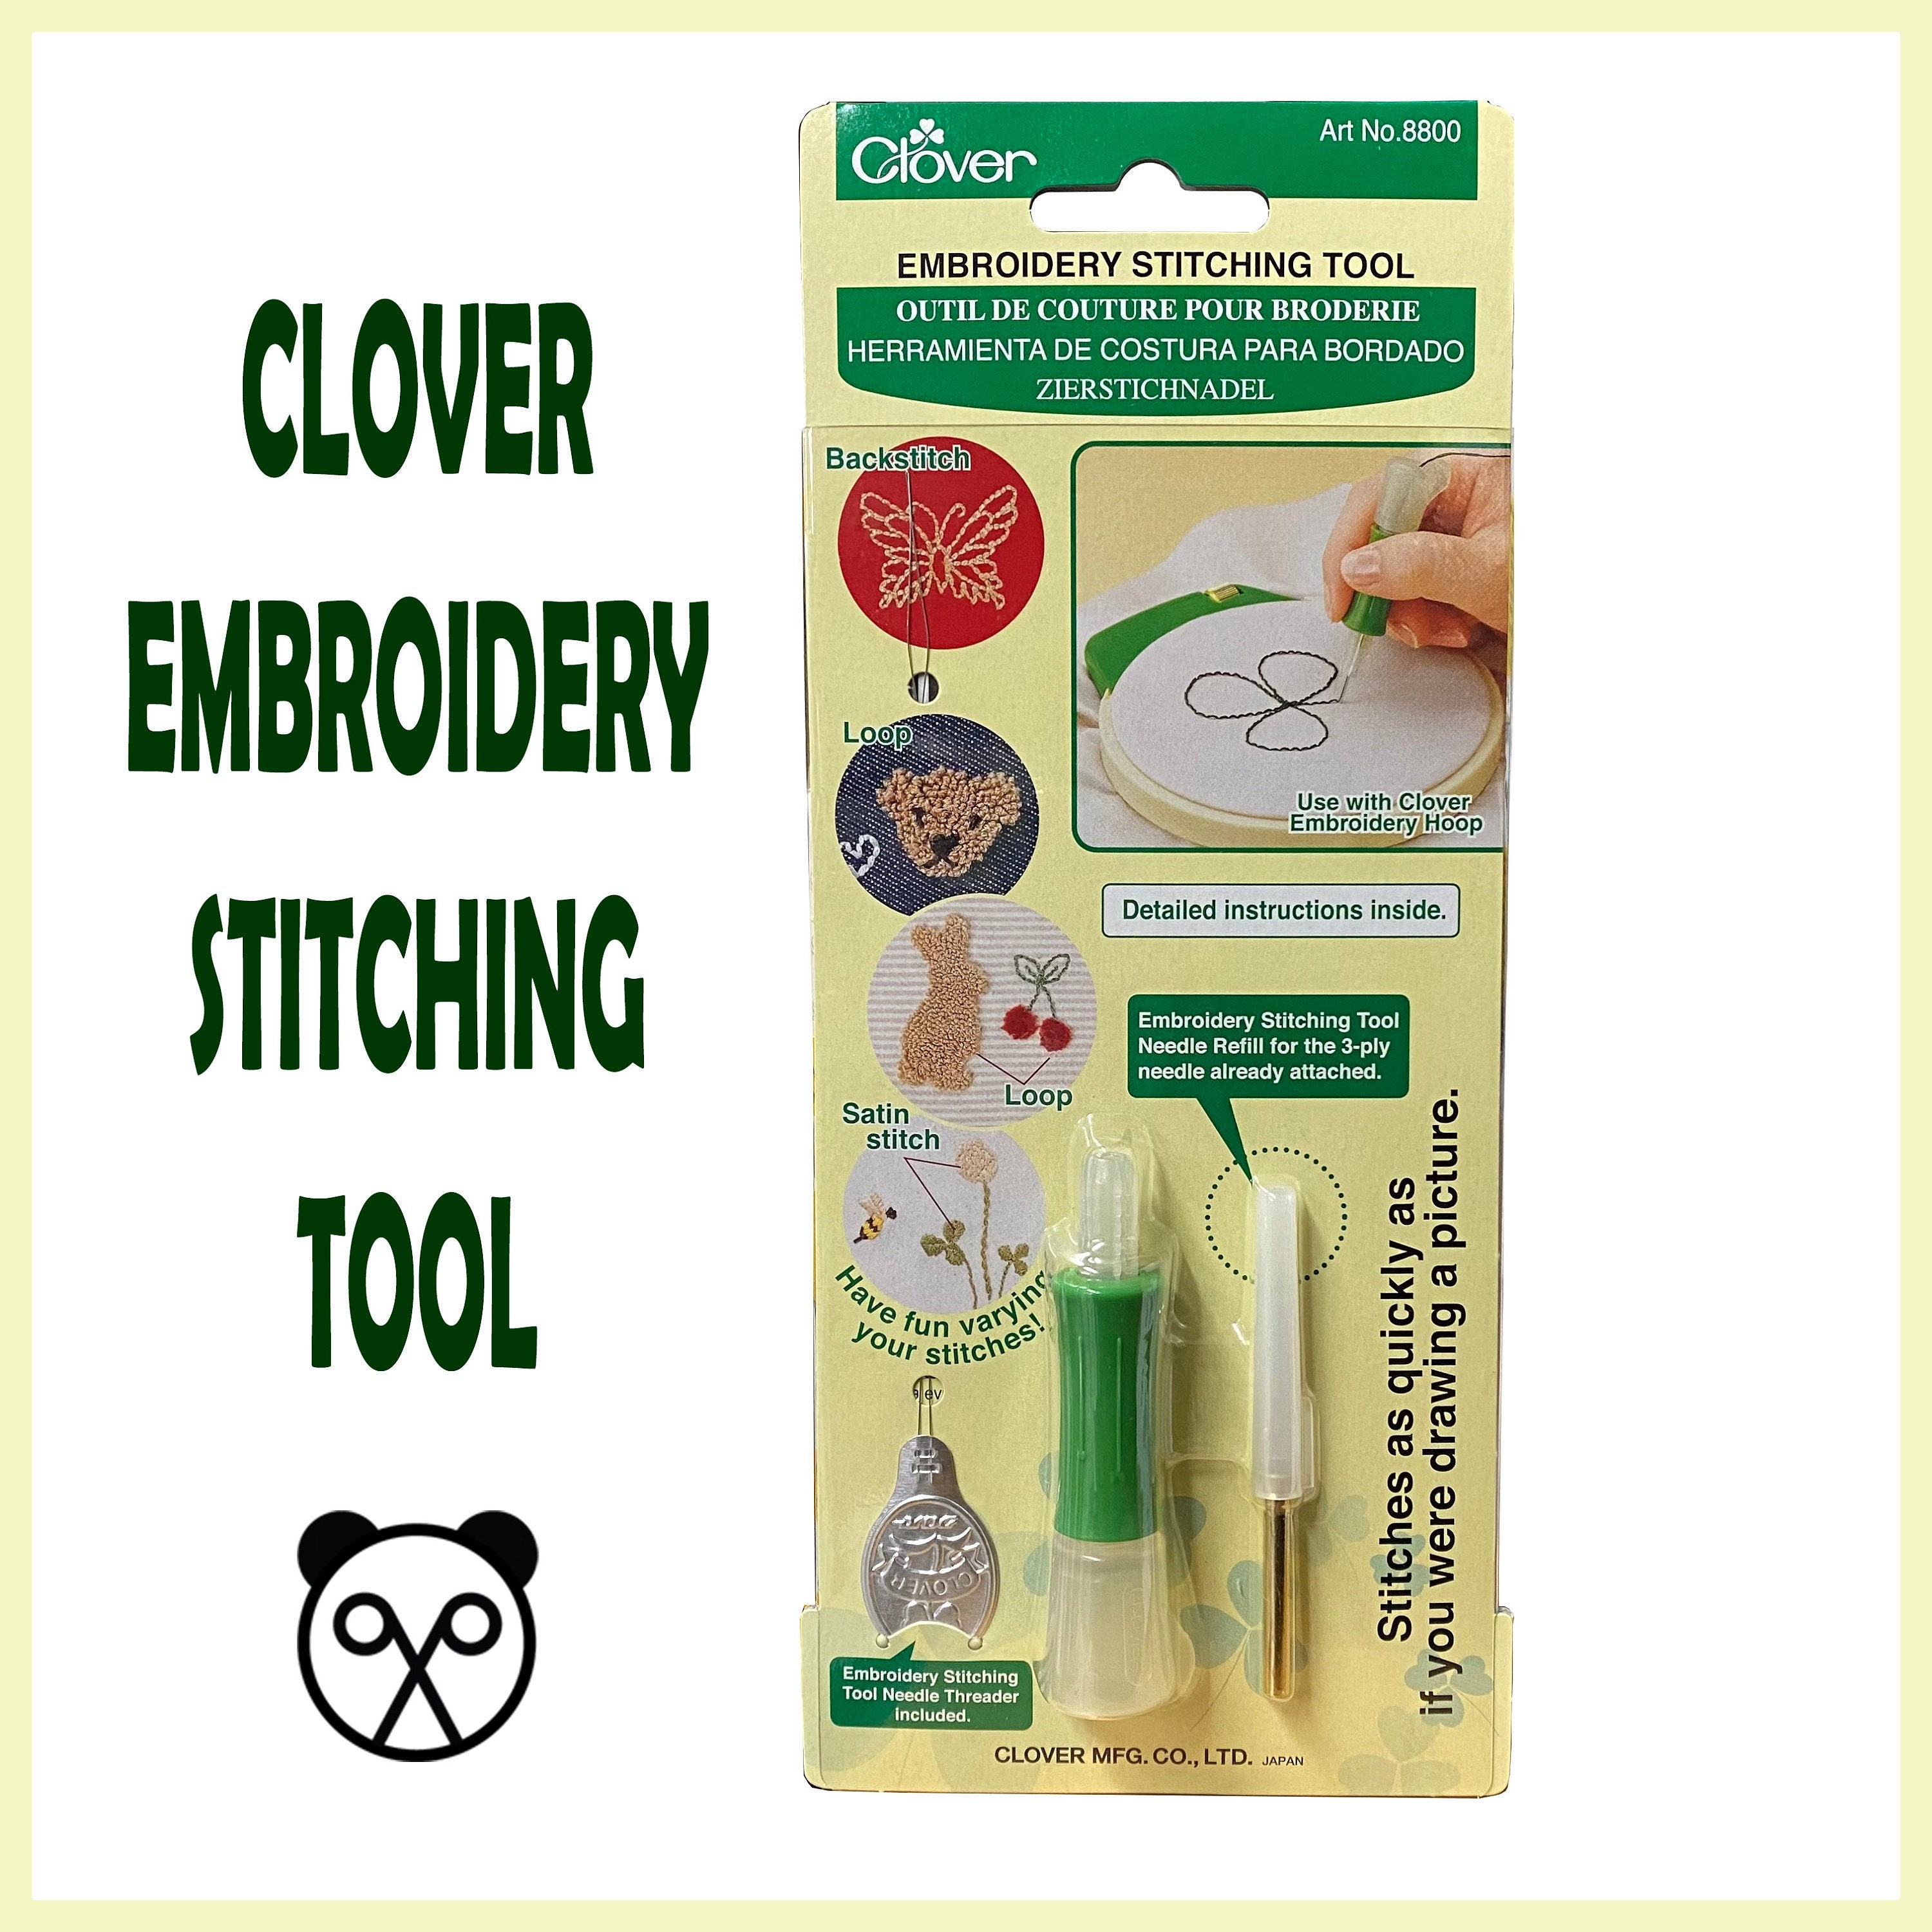 Clover Embroidery Stitching Tool Needle Refill-3-Ply